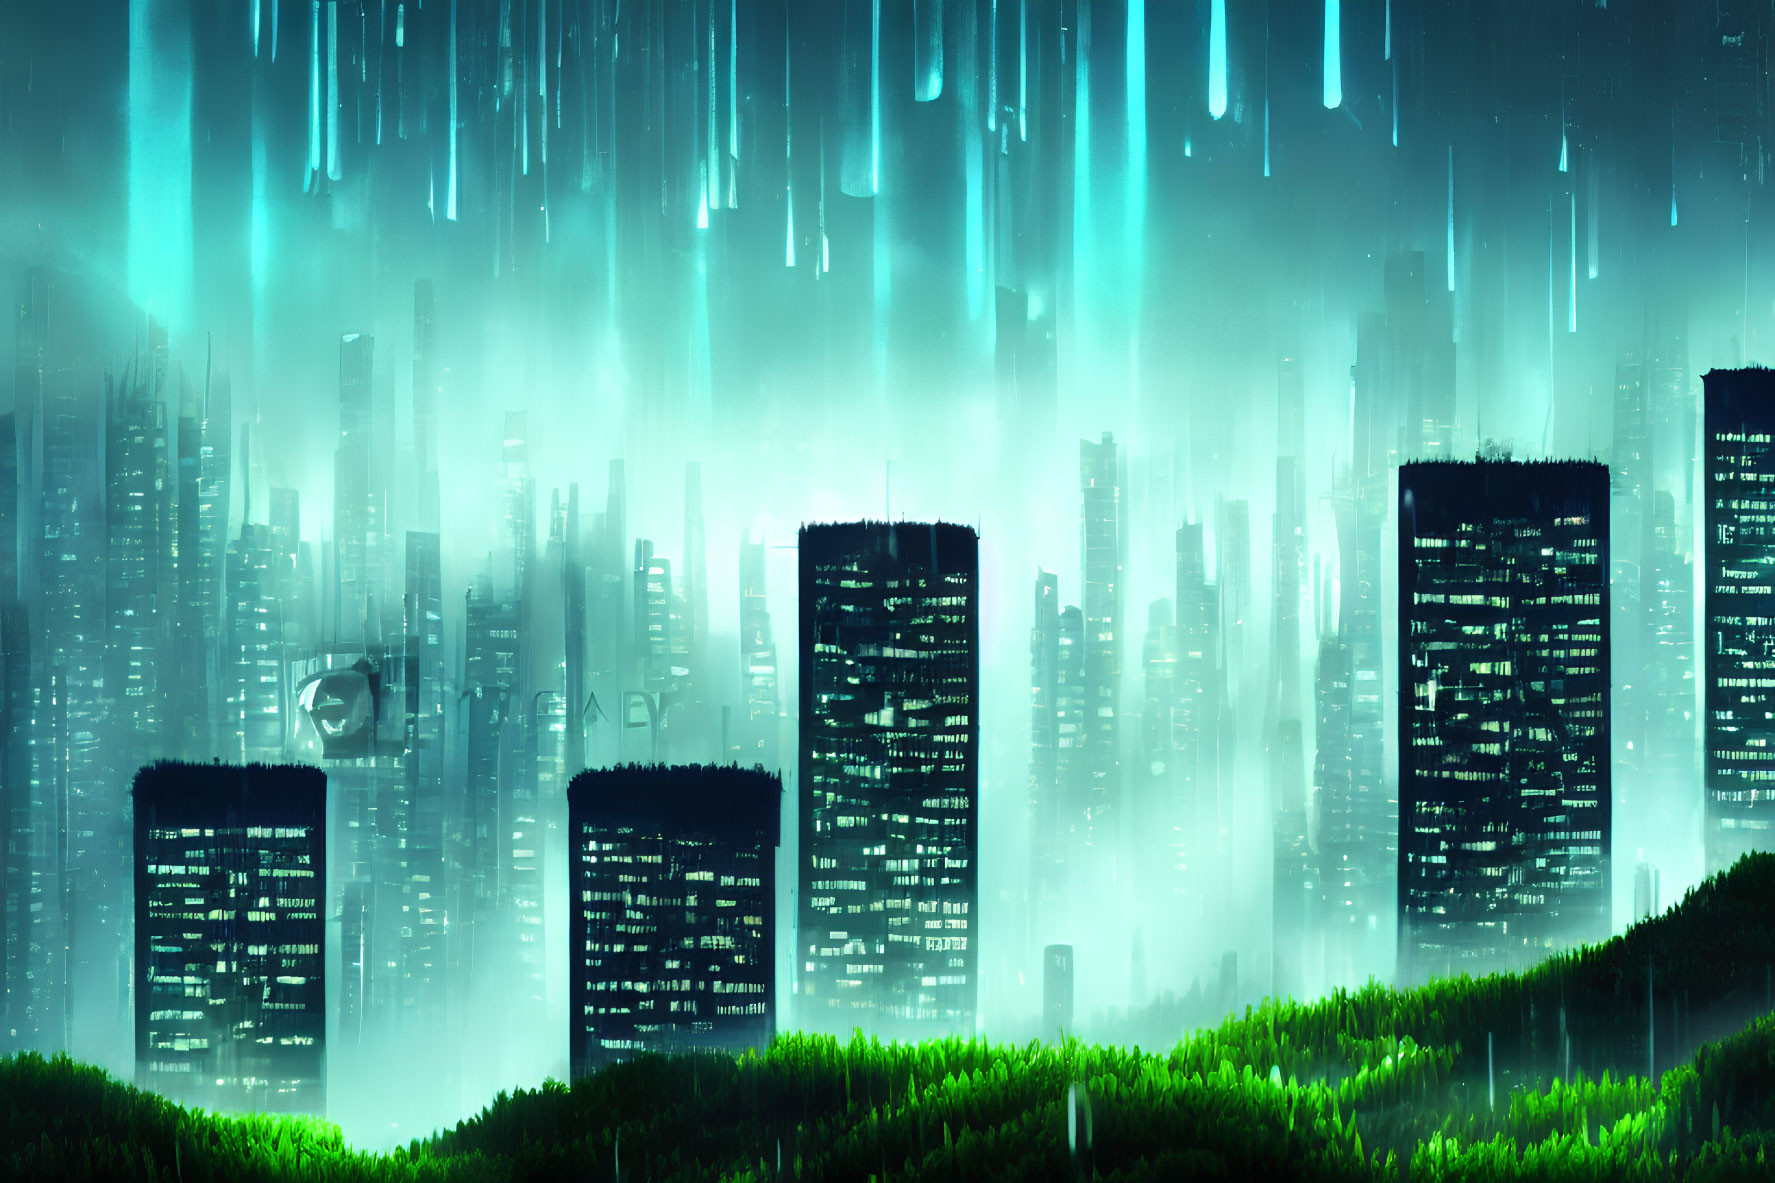 Futuristic night cityscape with neon-green lighting and skyscrapers